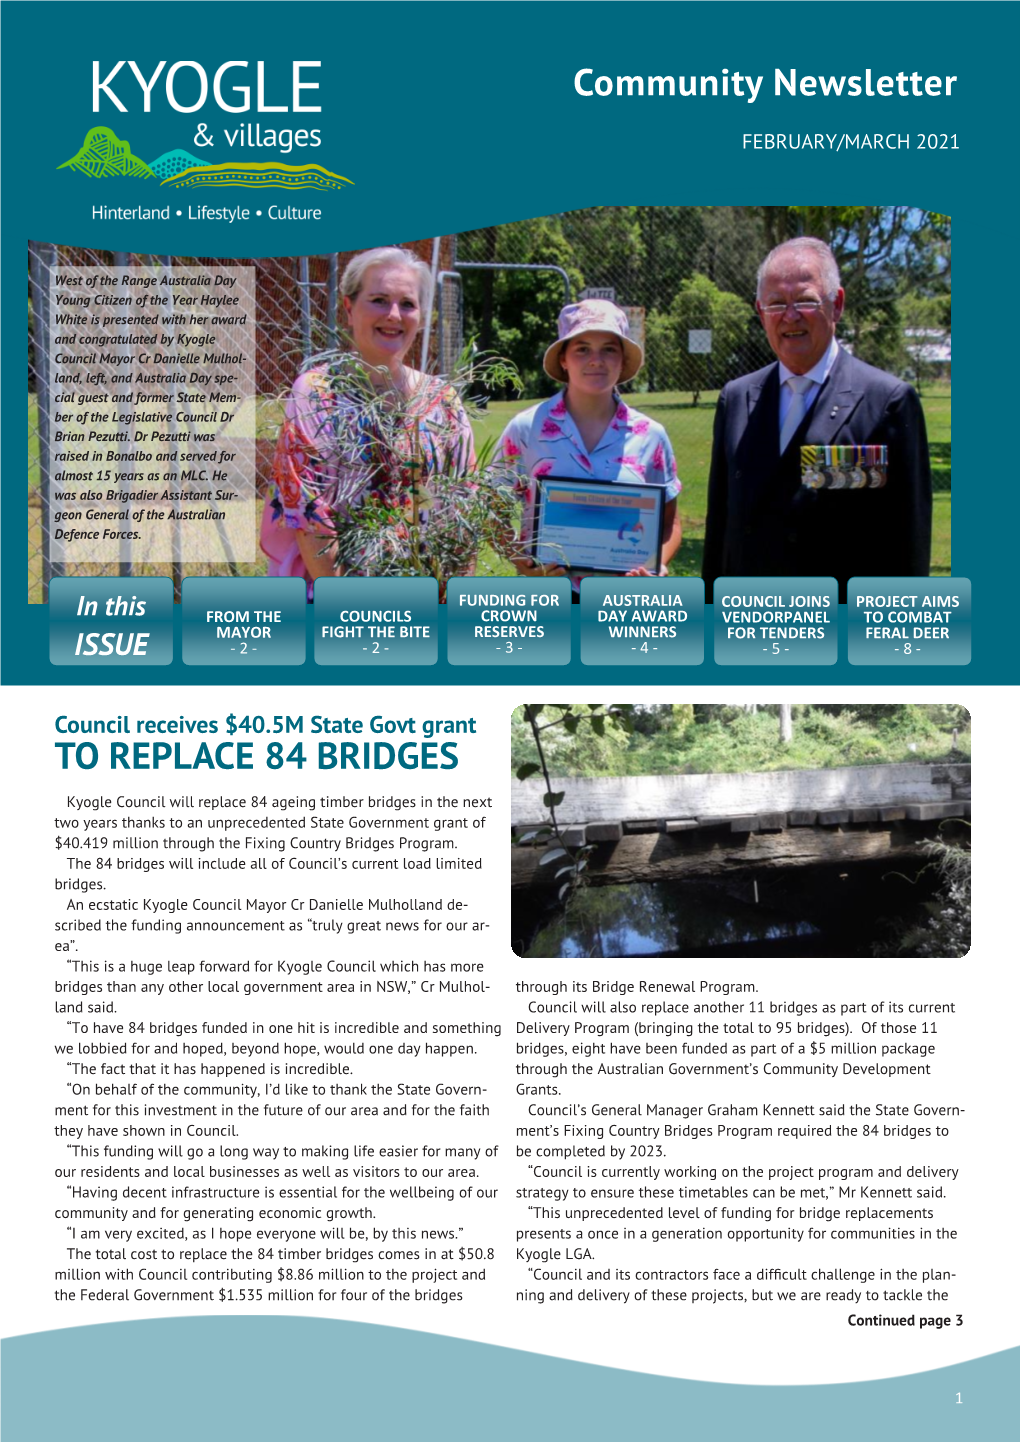 Community Newsletter to REPLACE 84 BRIDGES